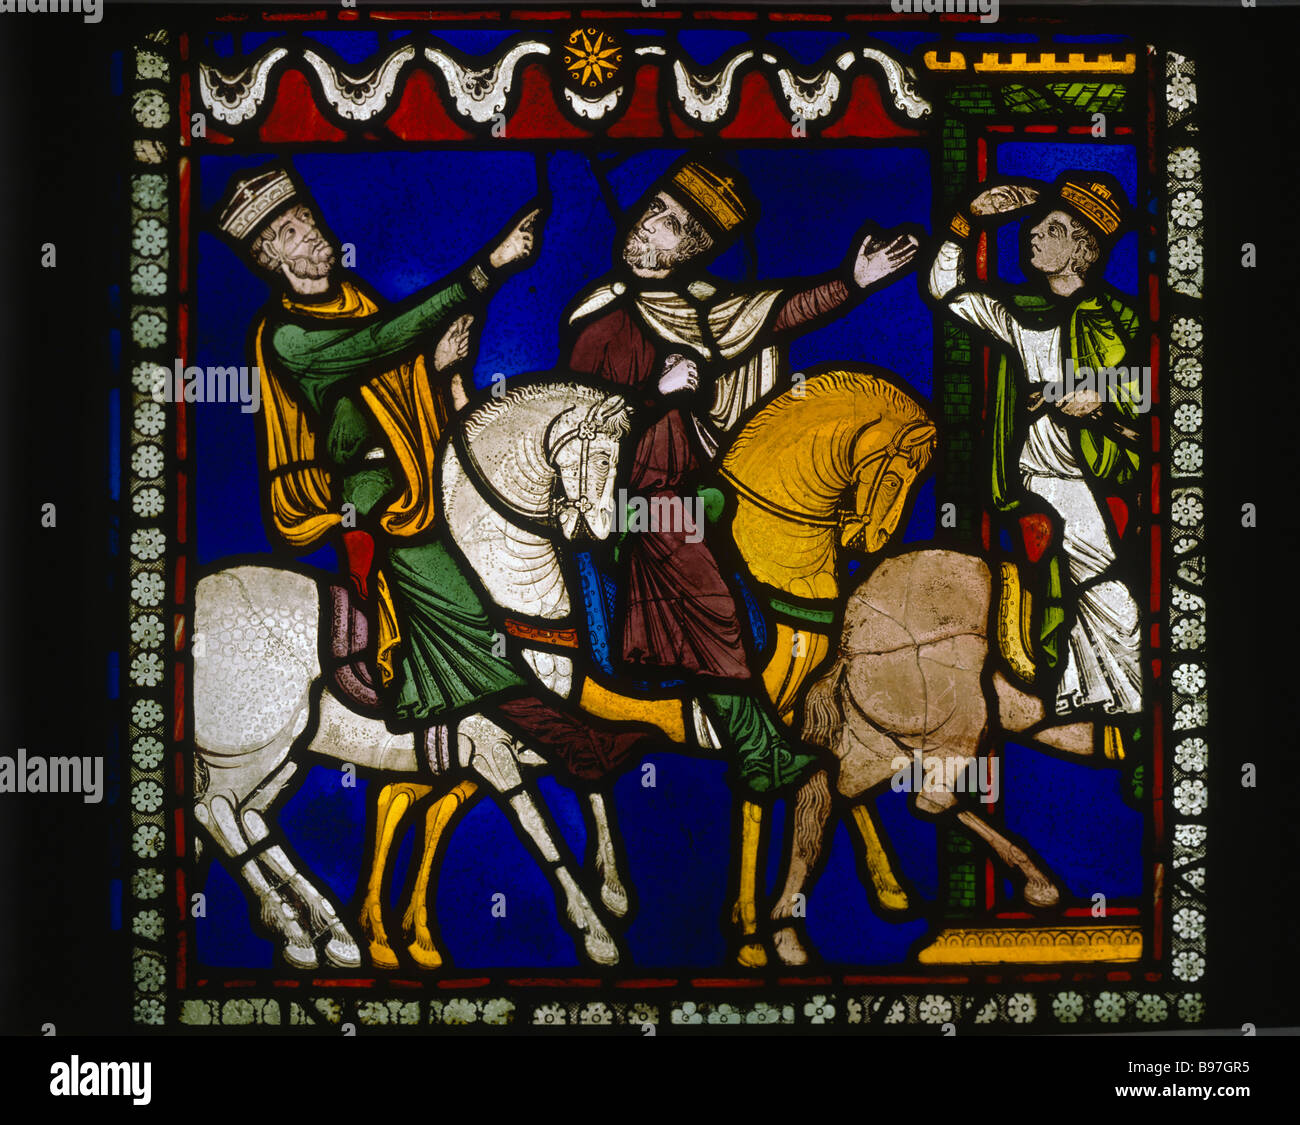 Magi following star panel 38 Poor Mans Bible window 13th century  Canterbury cathedral Stock Photo